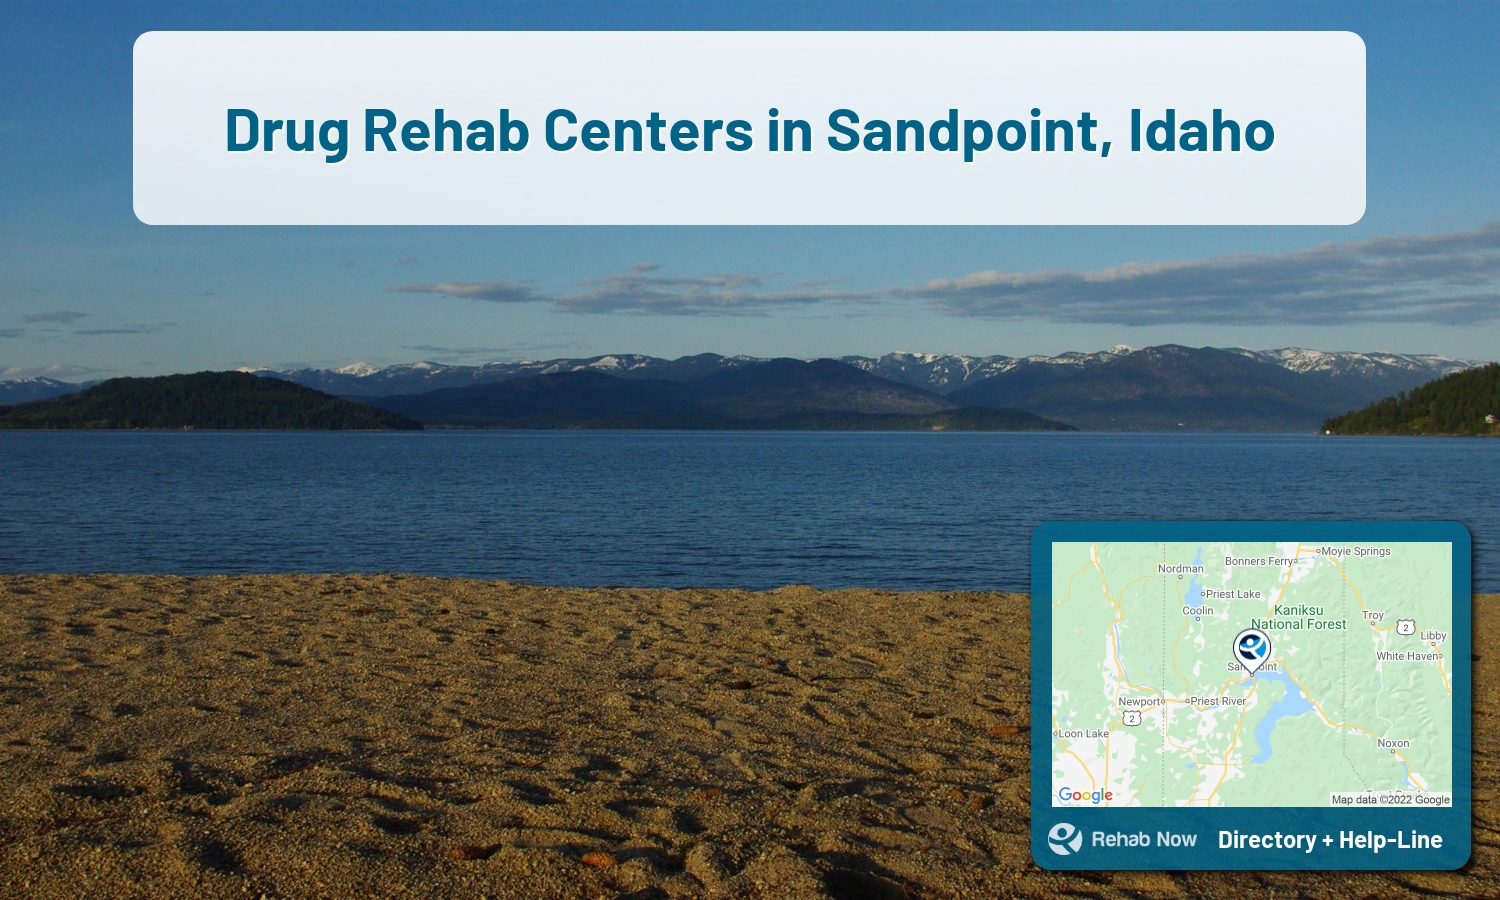 Sandpoint, ID Treatment Centers. Find drug rehab in Sandpoint, Idaho, or detox and treatment programs. Get the right help now!